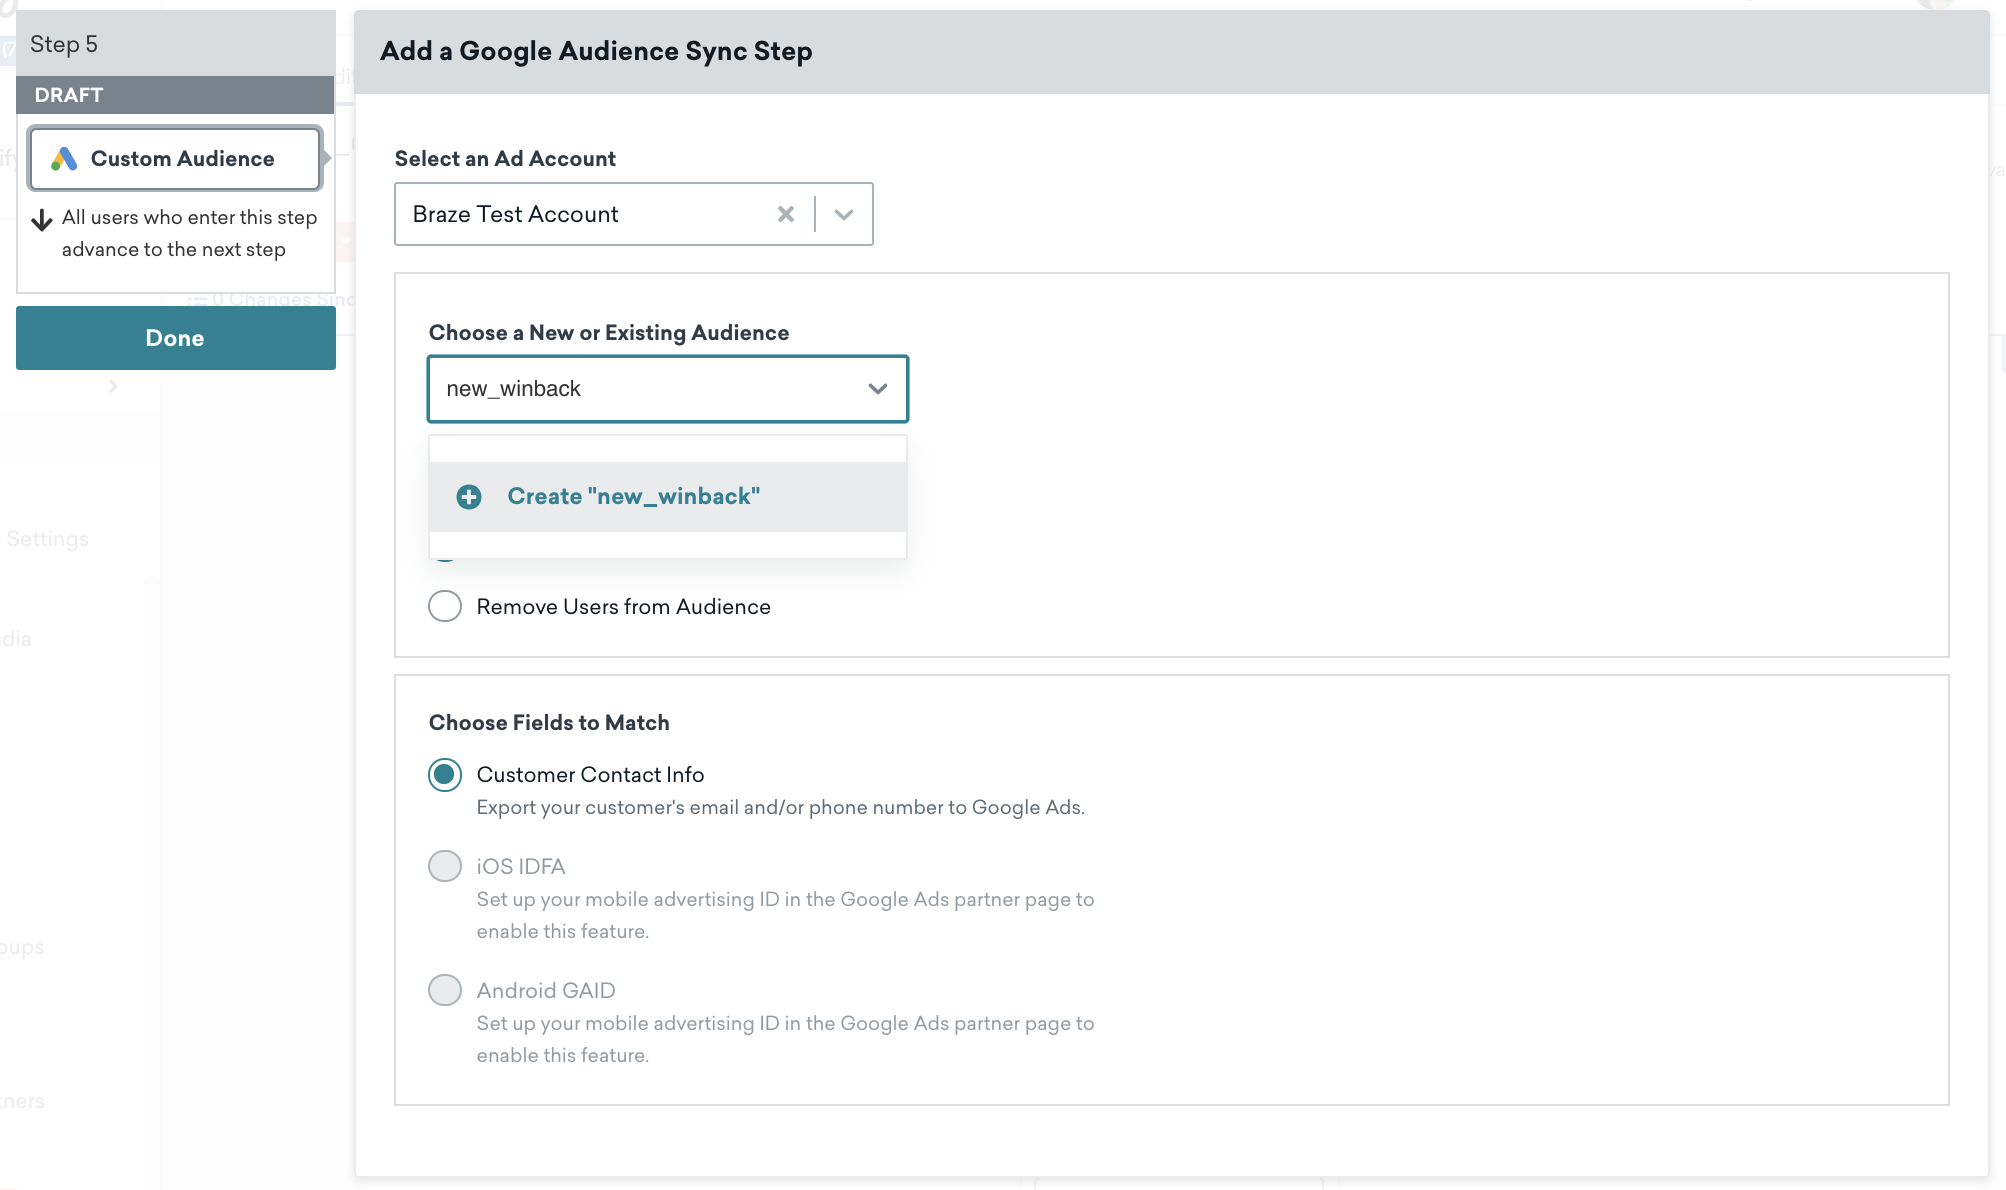 Expanded view of the Custom Audience Canvas step. Here, the desired Ad account is selected, a new audience is created, and the "customer contact info" checkbox is selected.